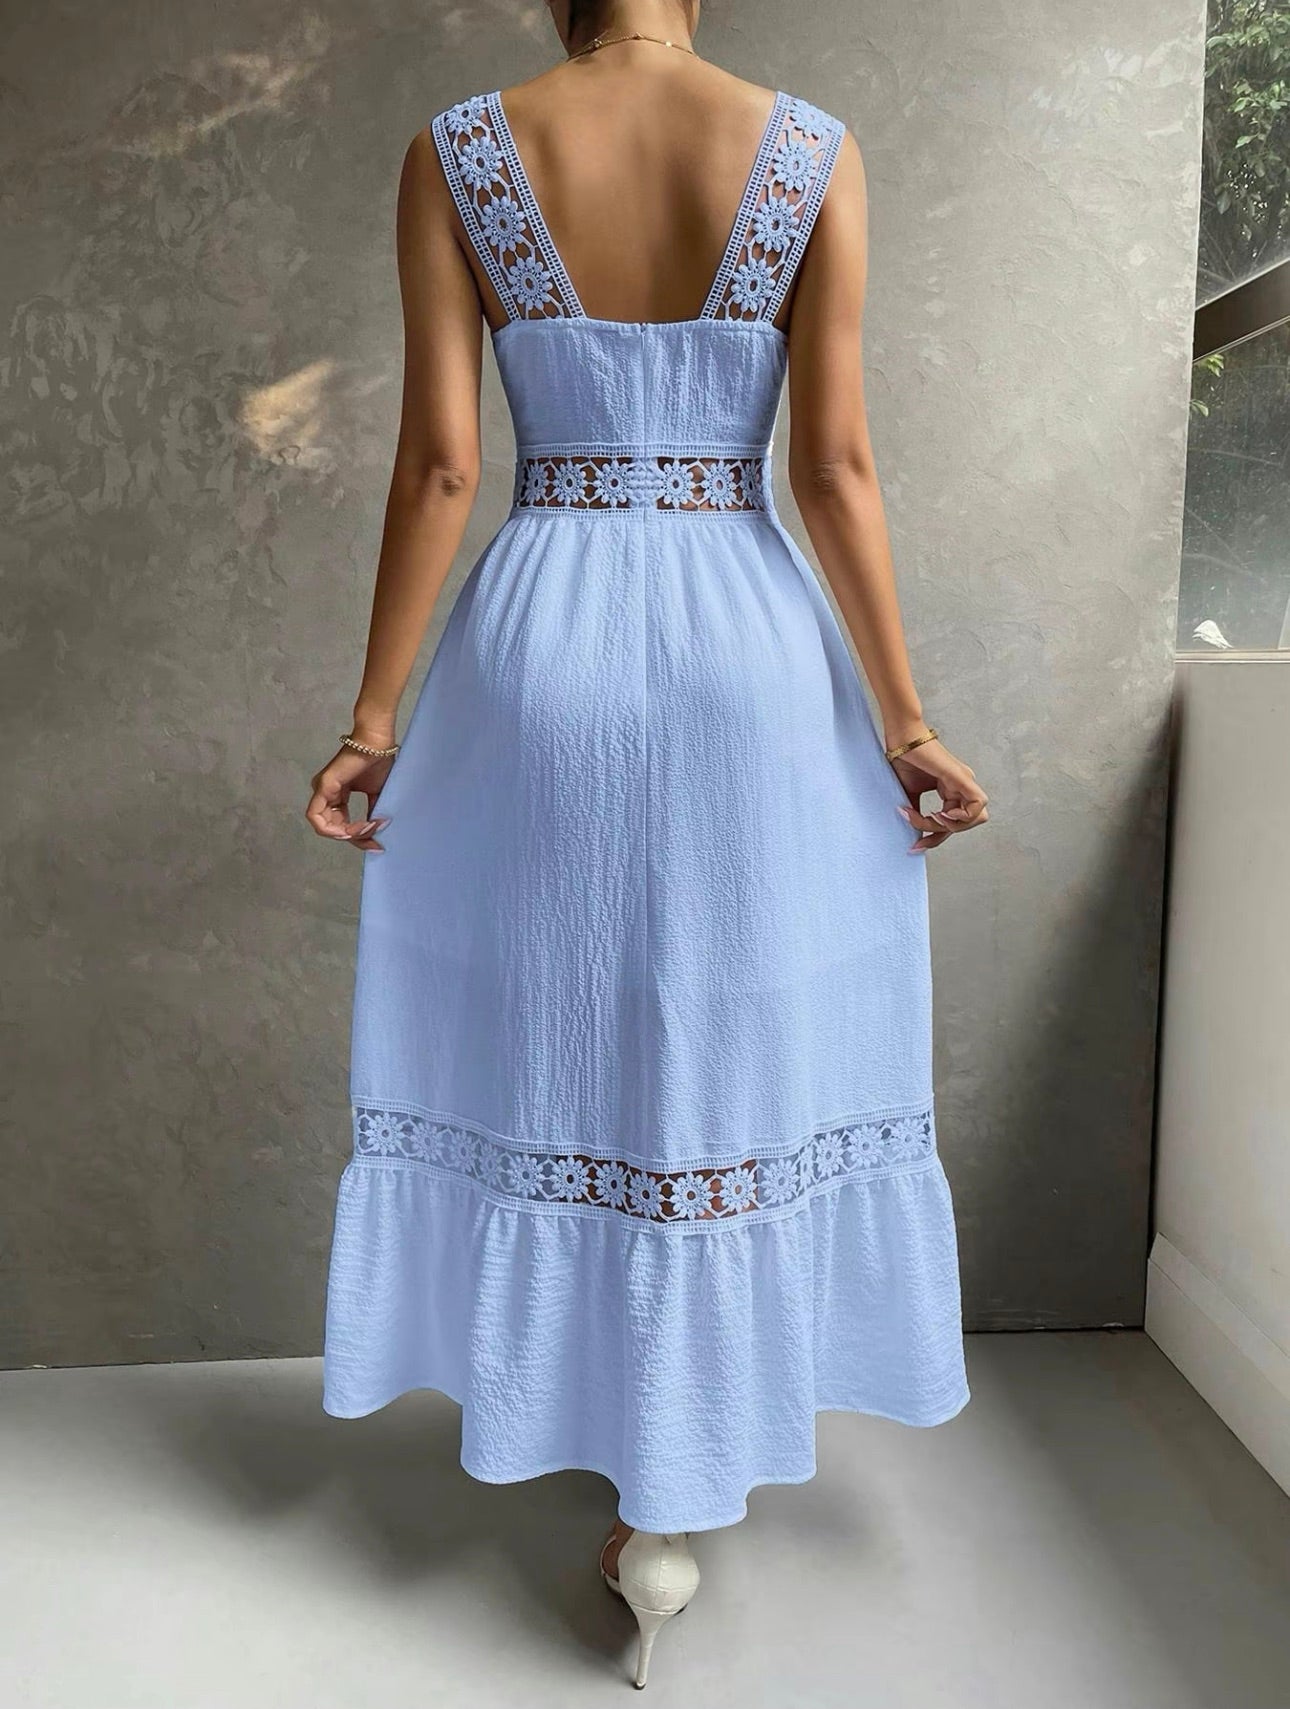 Women's Contrast Lace Flower Decor Hollow Out A Line Dress, Casual Sleeveless Square Neck Long Dress for Summer